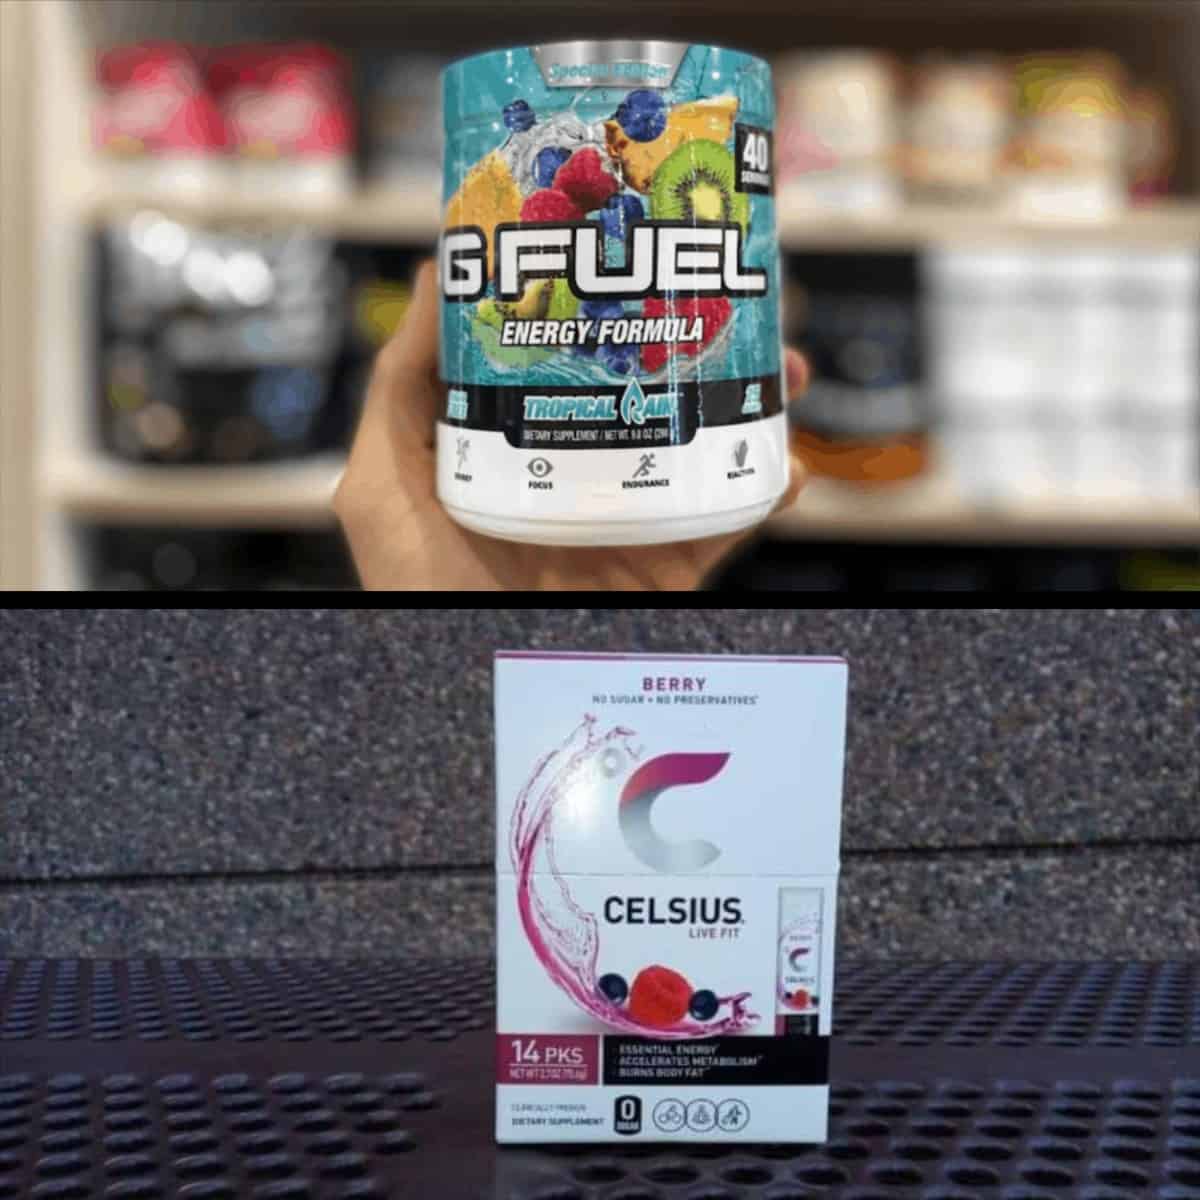 G-Fuel vs Celsius-on-the-go